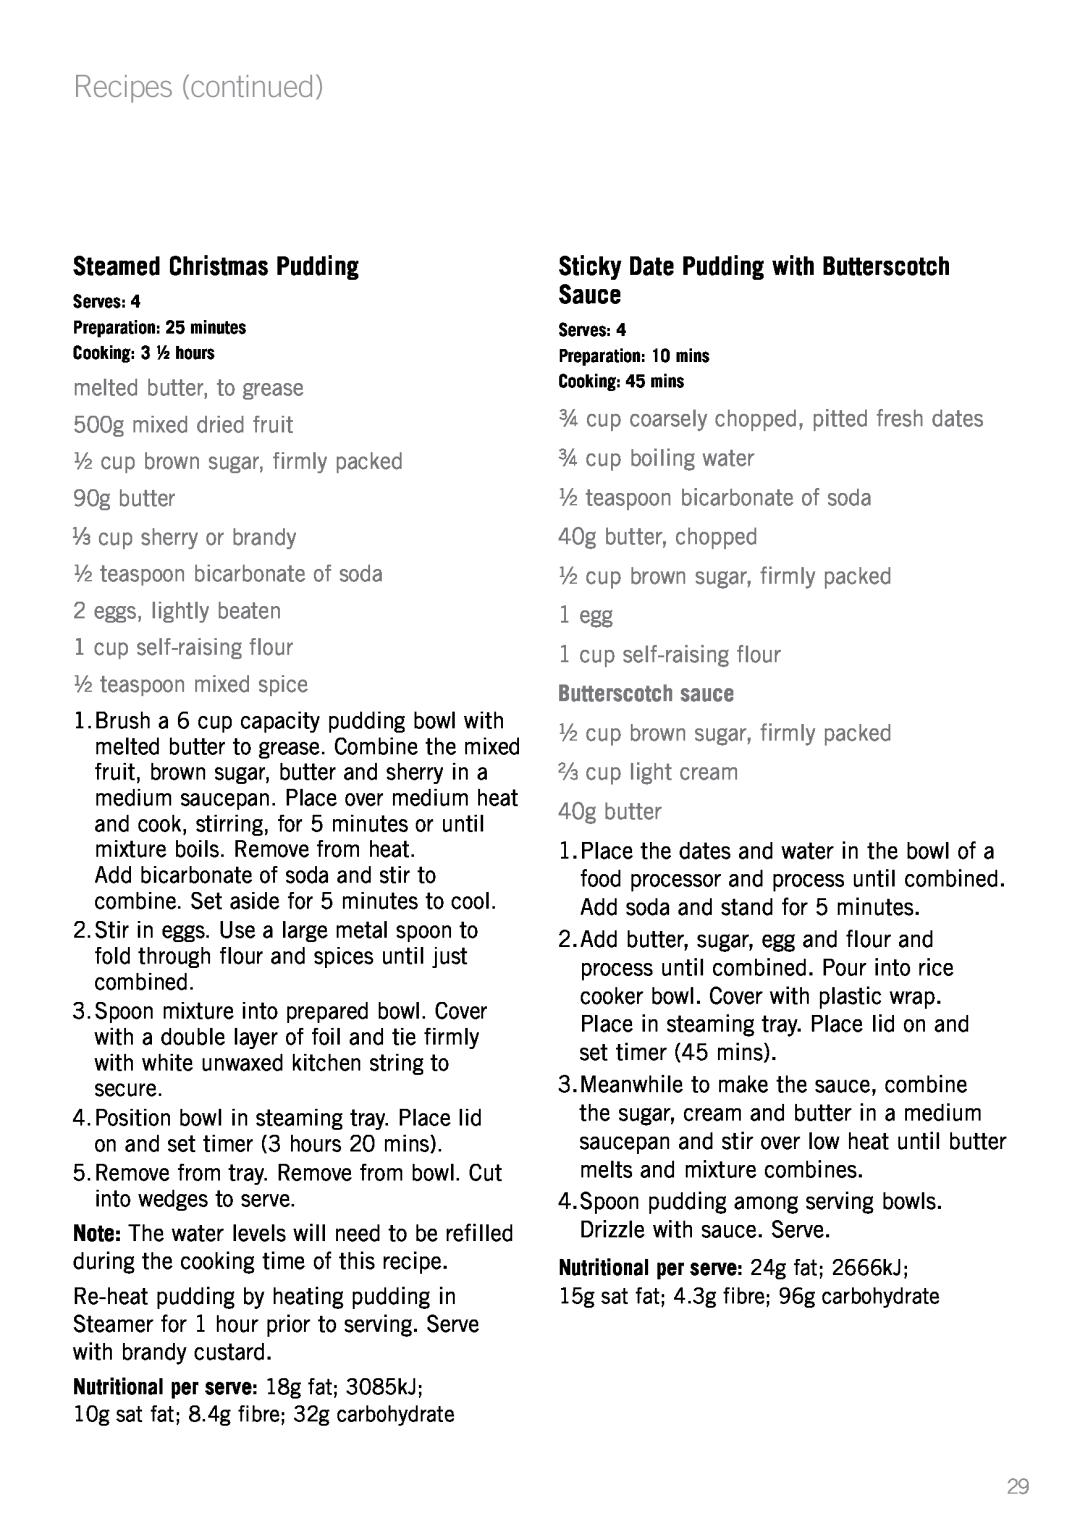 Sunbeam ST6820 manual Steamed Christmas Pudding, Sticky Date Pudding with Butterscotch Sauce, cup sherry or brandy 